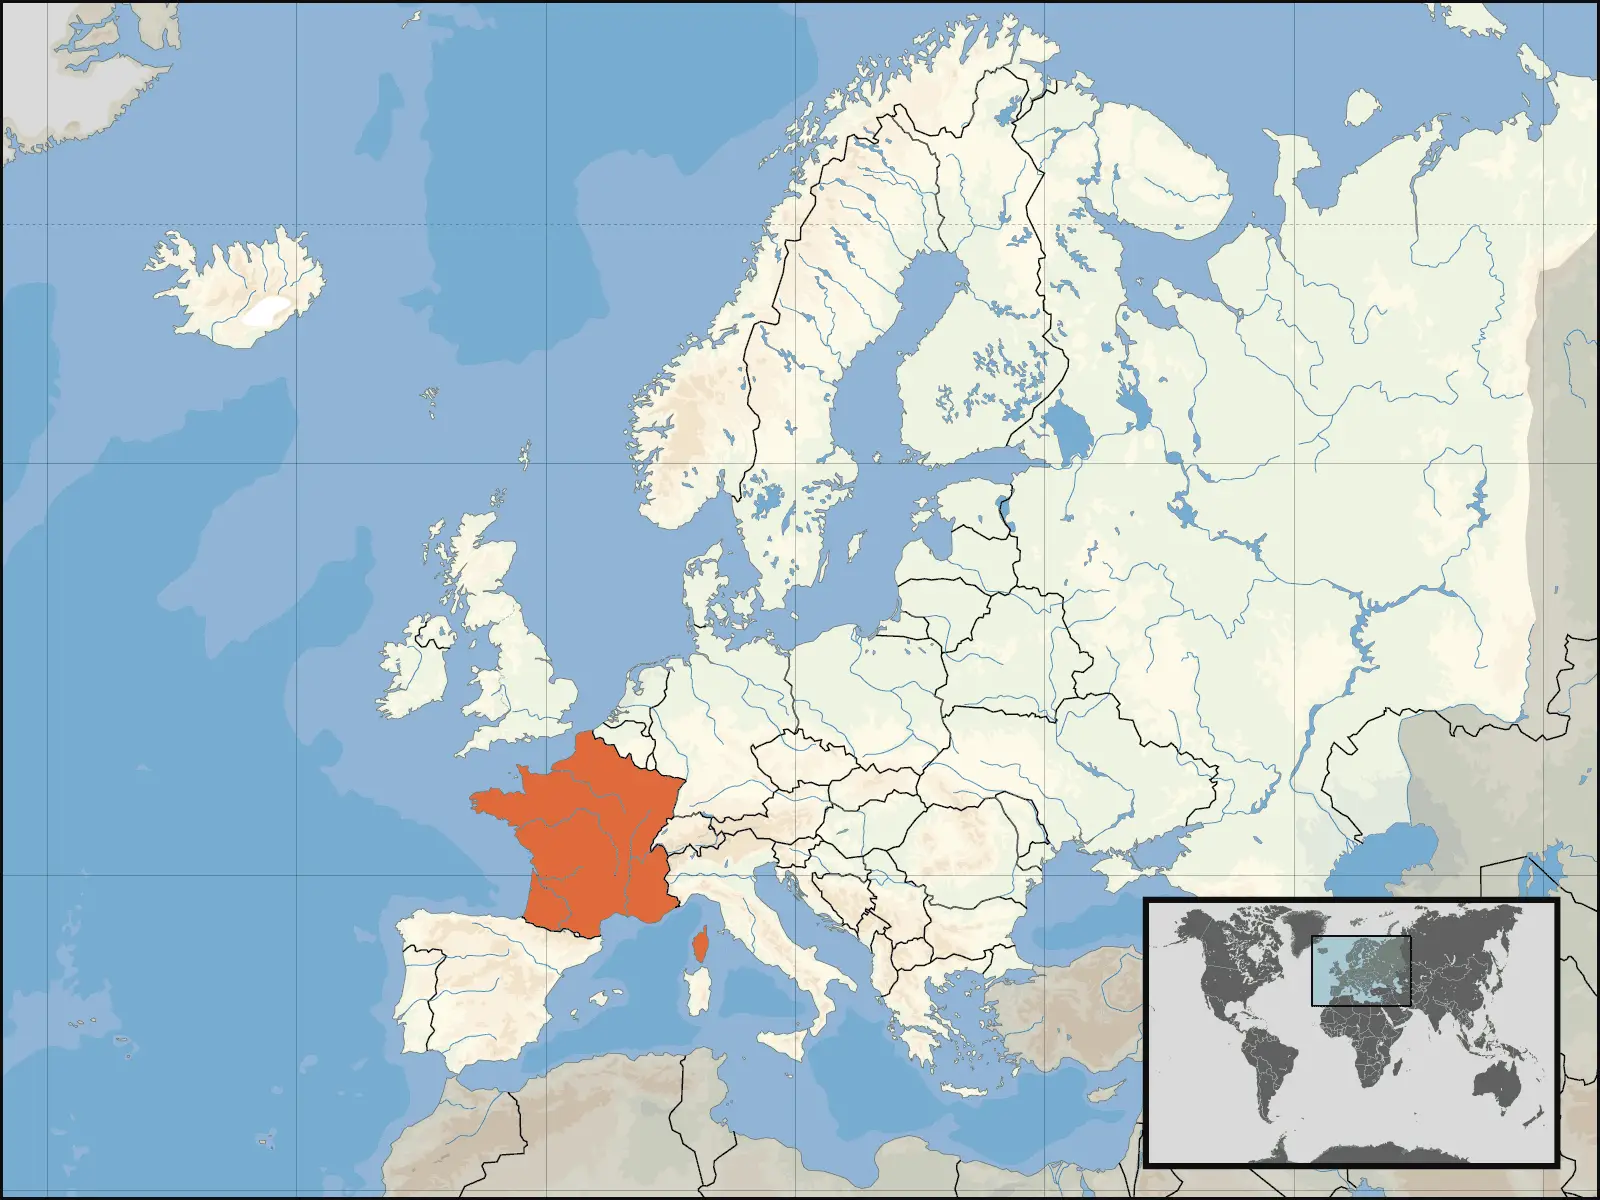 Europe Location of France